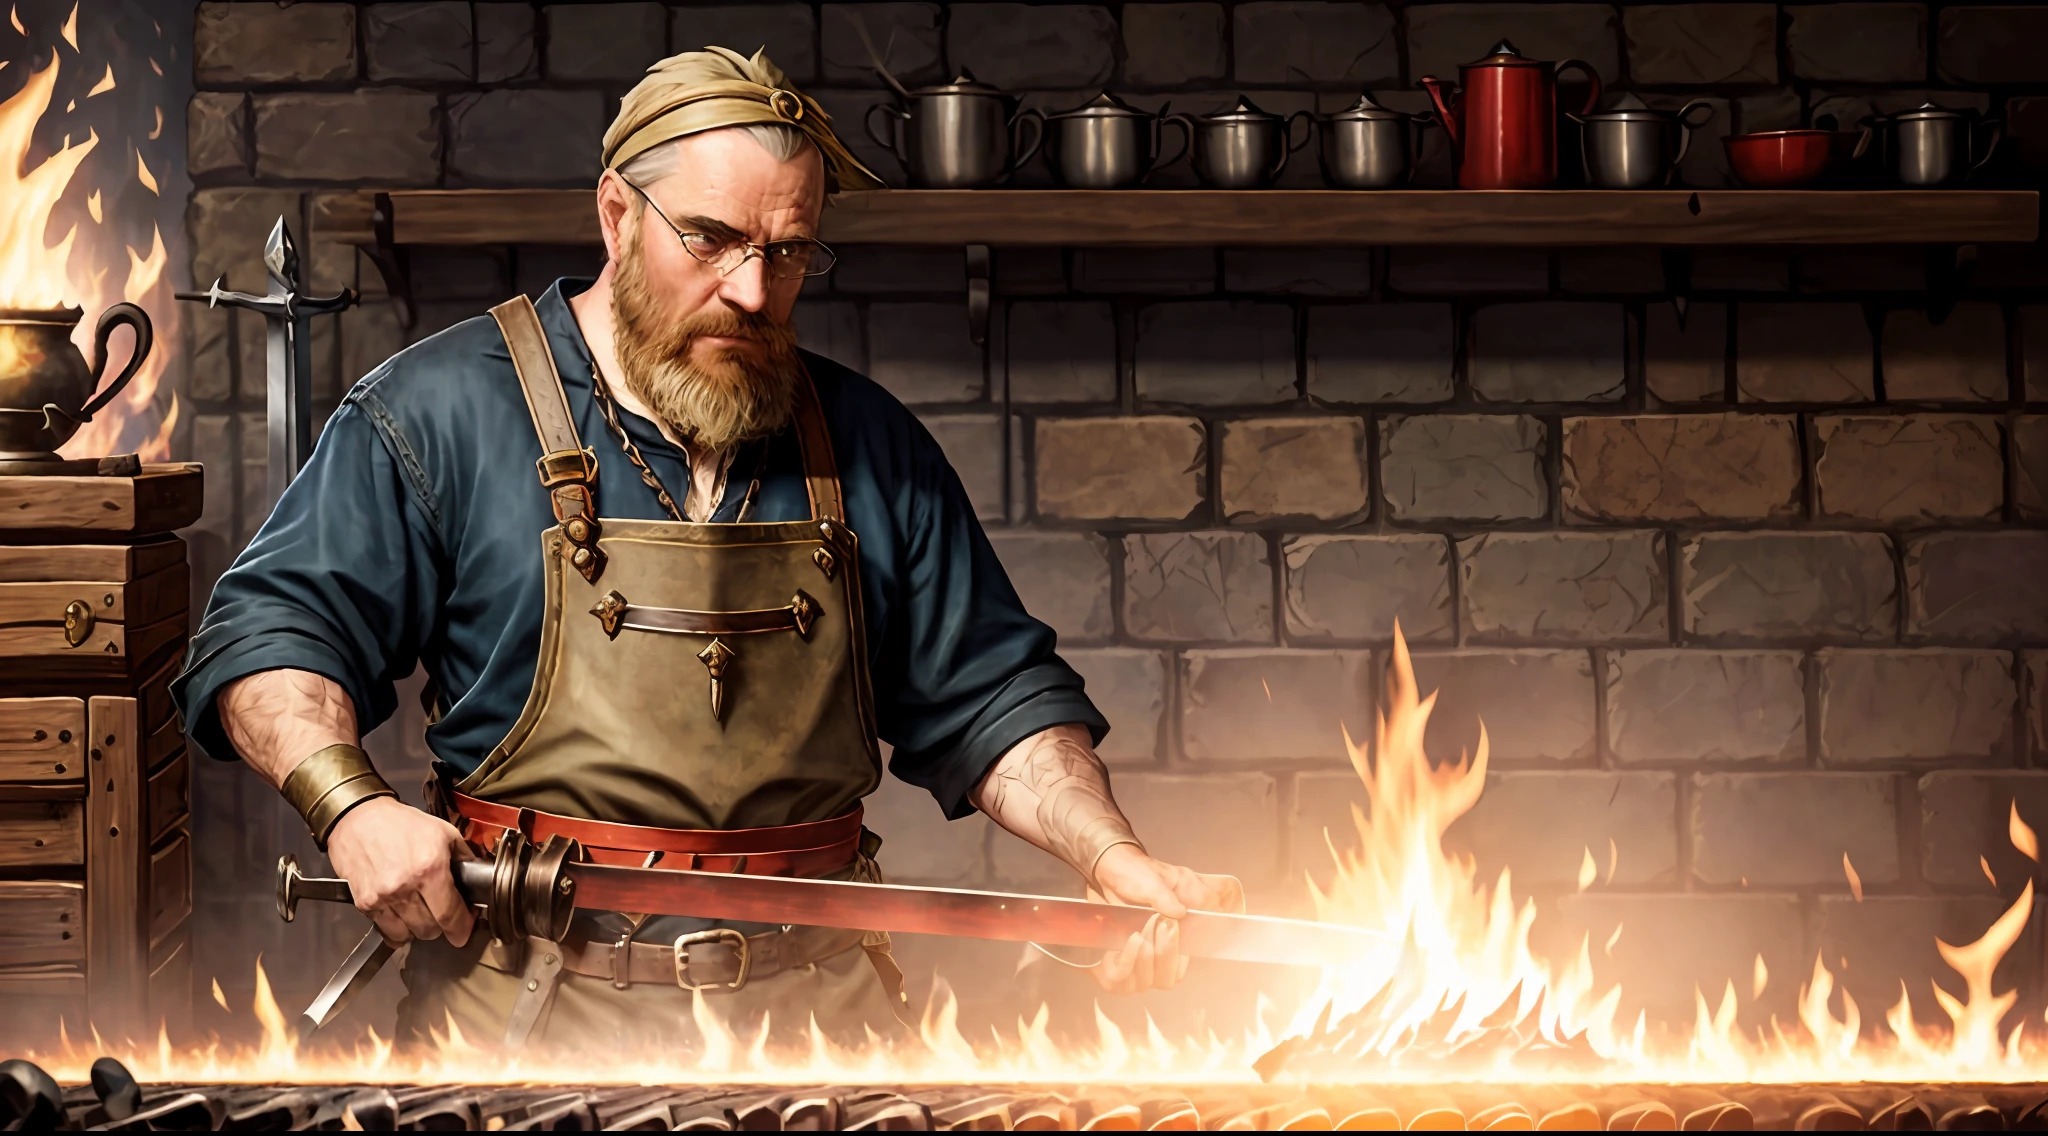 RPG: close up view of a 19th century blacksmith forge where a hand is (((holding the hilt of a sword while heating the blade in the fire, emphasis on red hot sword))), blacksmith, the god of the forge, the blacksmith, hearthstone card art, female dwarven blacksmith, blacksmith's outfit, hearthstone card artwork, ancient blacksmith god, hearthstone concept art, forge, hearthstone art, hearthstone style art, smelters, painted portrait of rugged odin